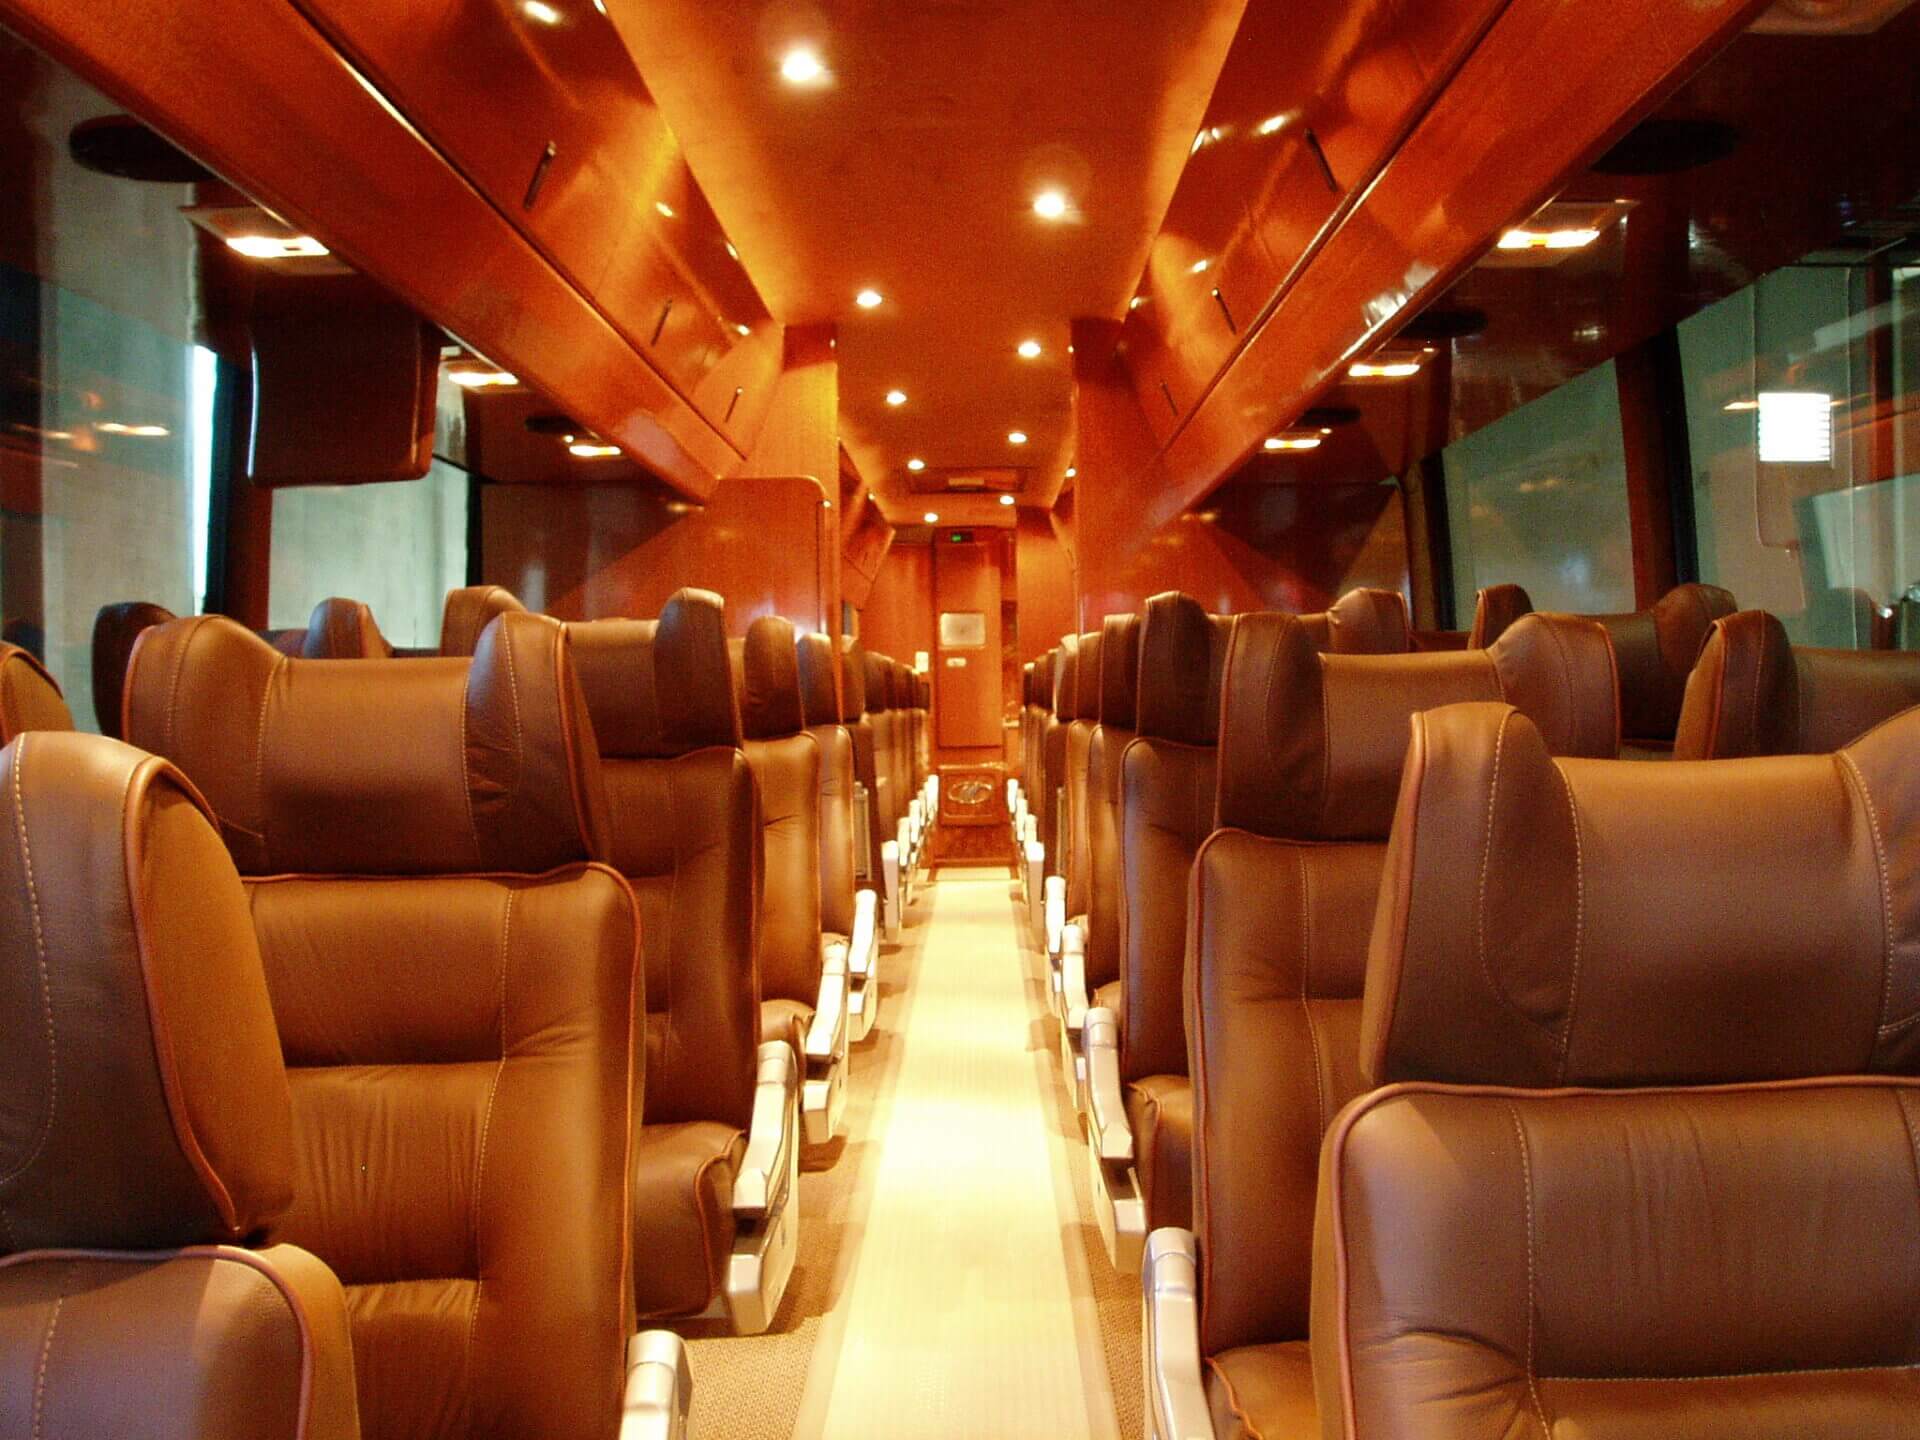 inside view of a bus with lights and seats